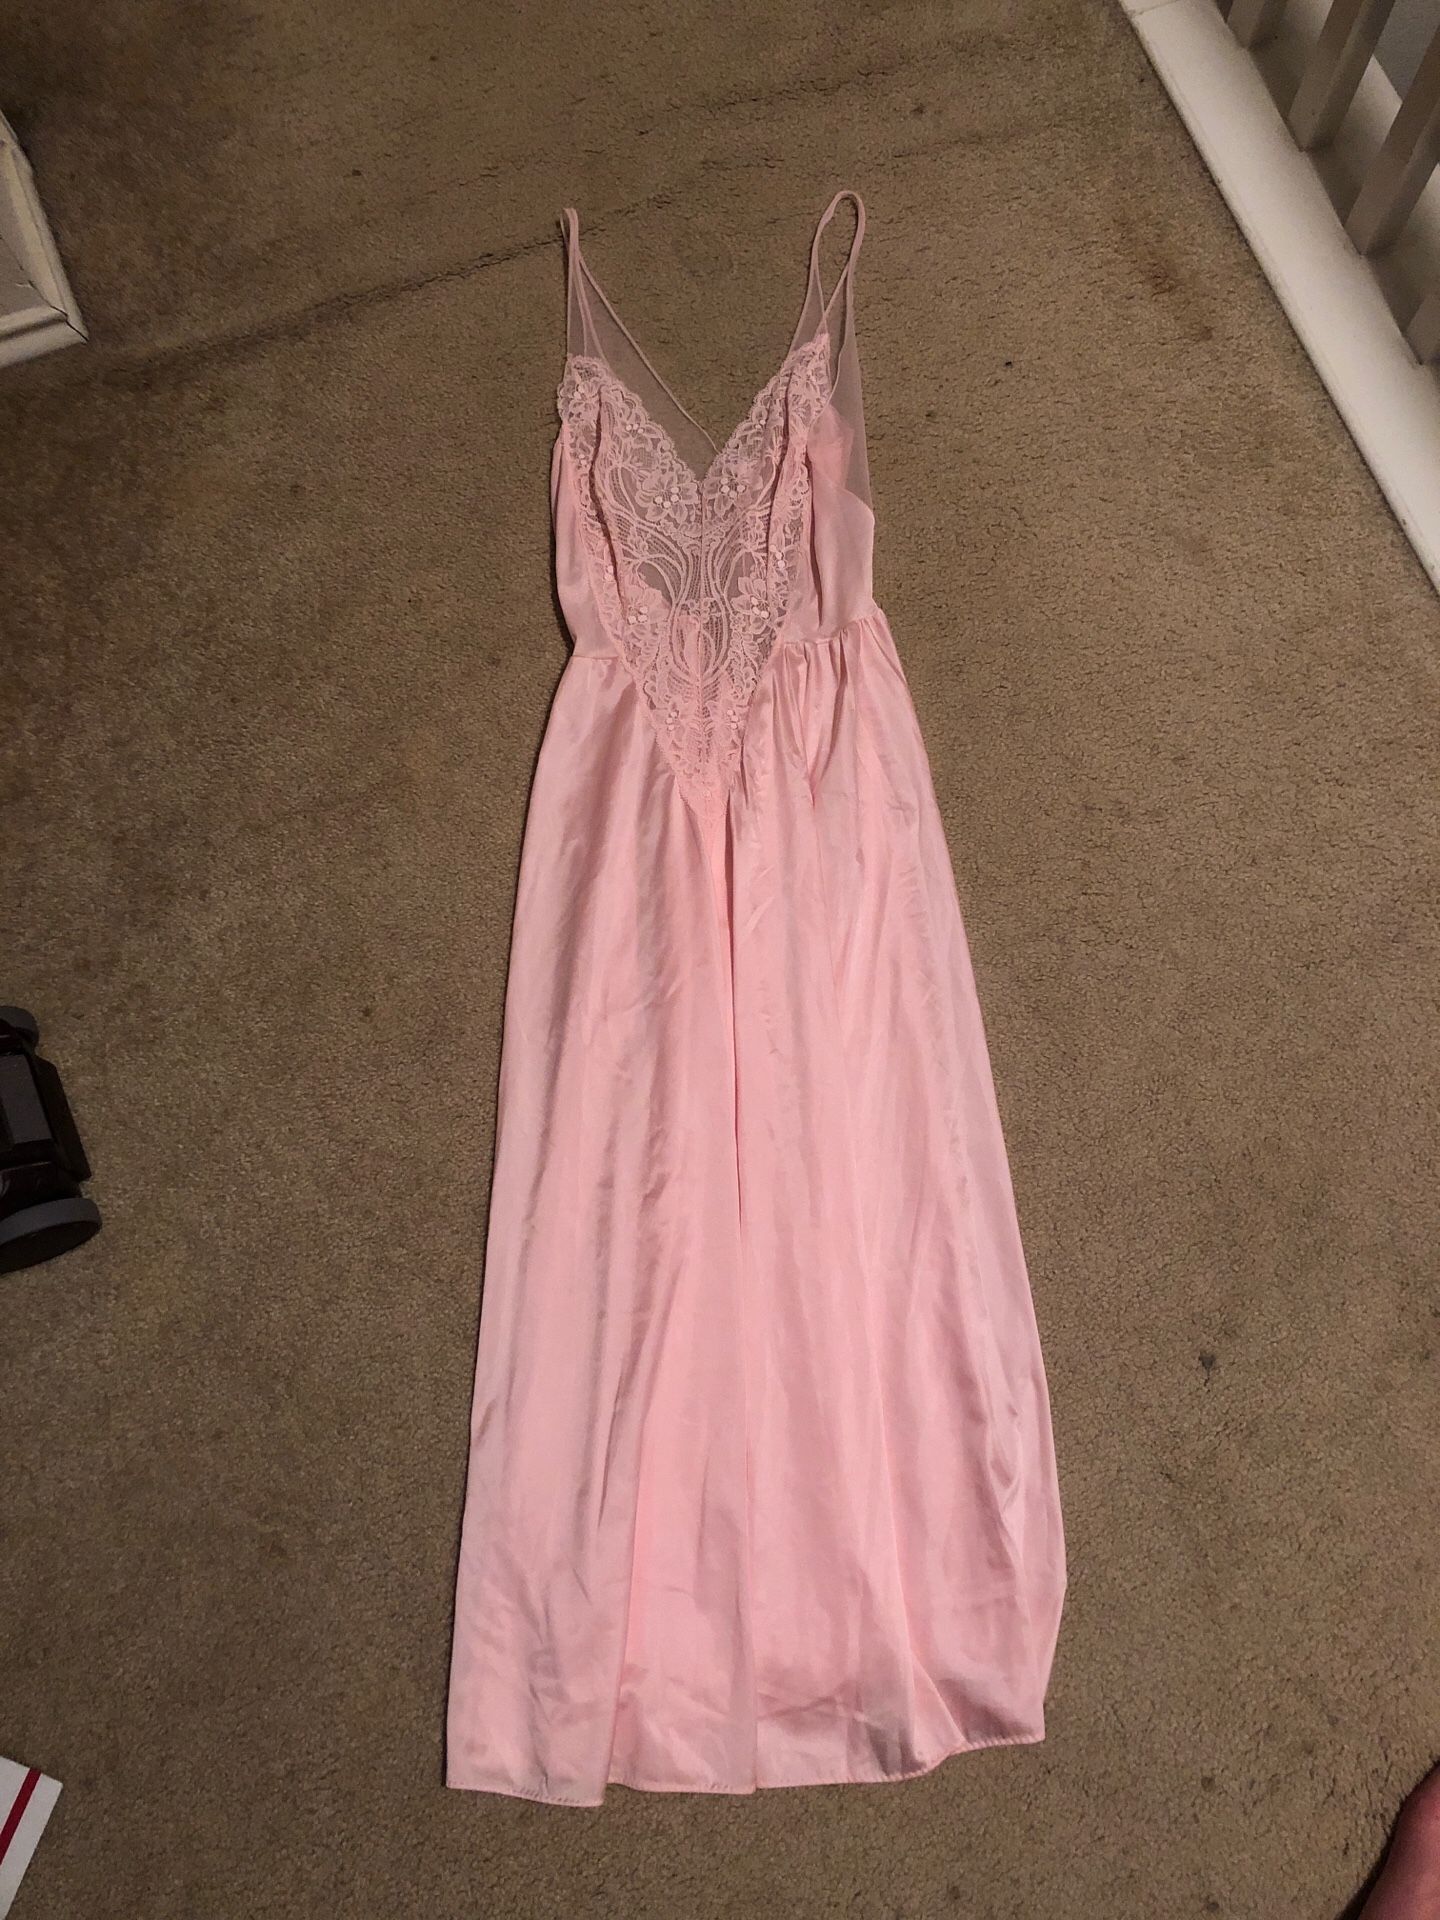 Very pretty never worn pink nightgown with lace